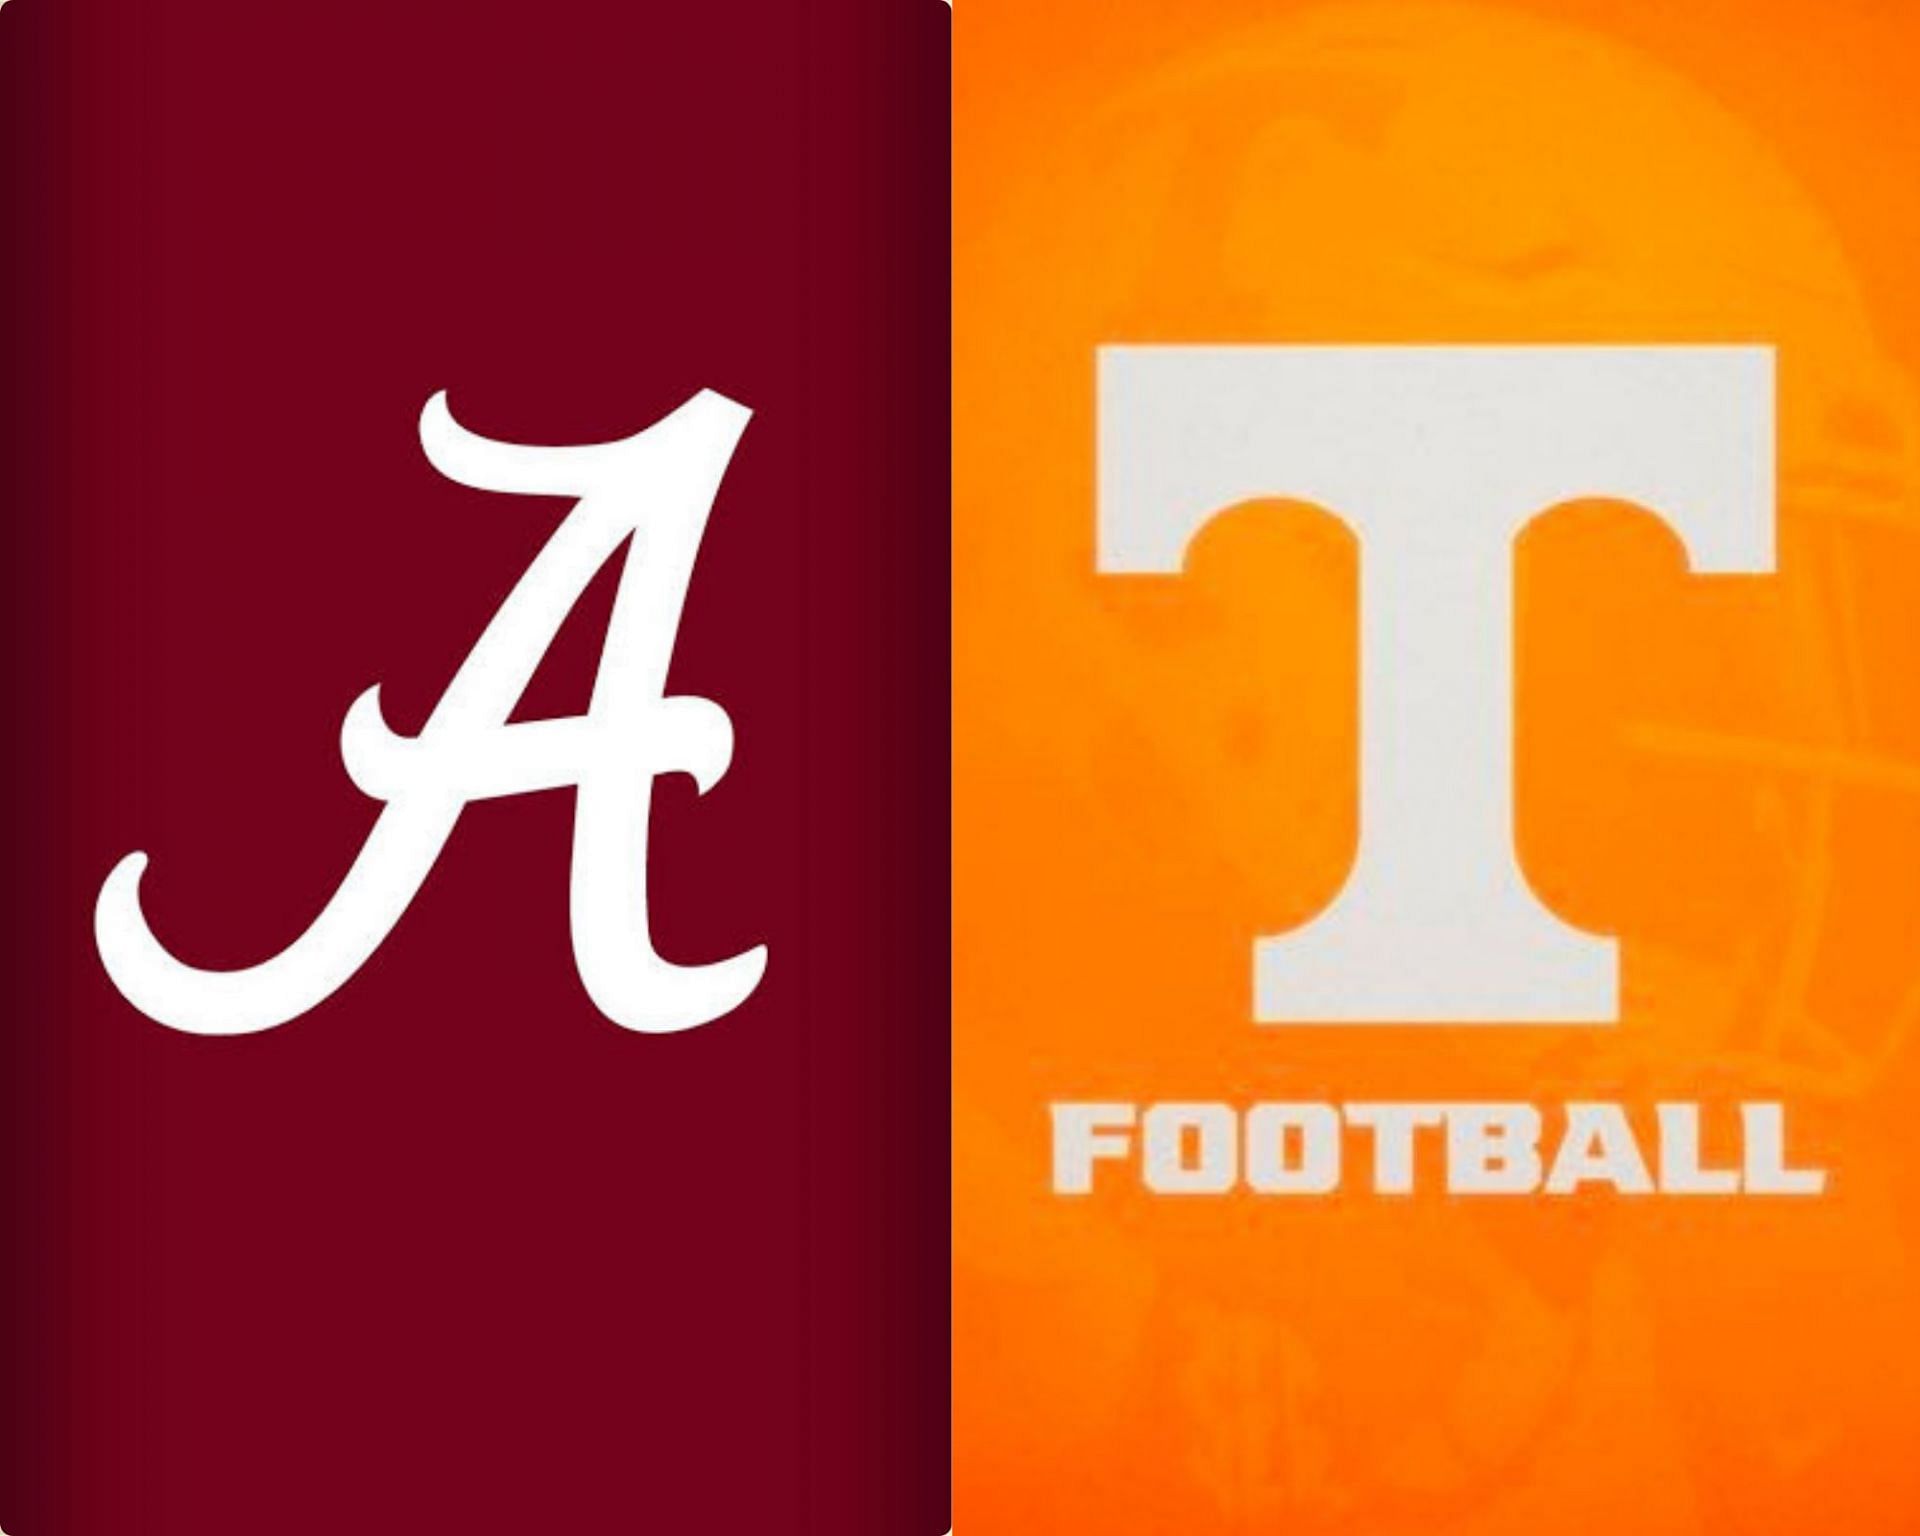 Alabama vs Tennessee comes up Week 8